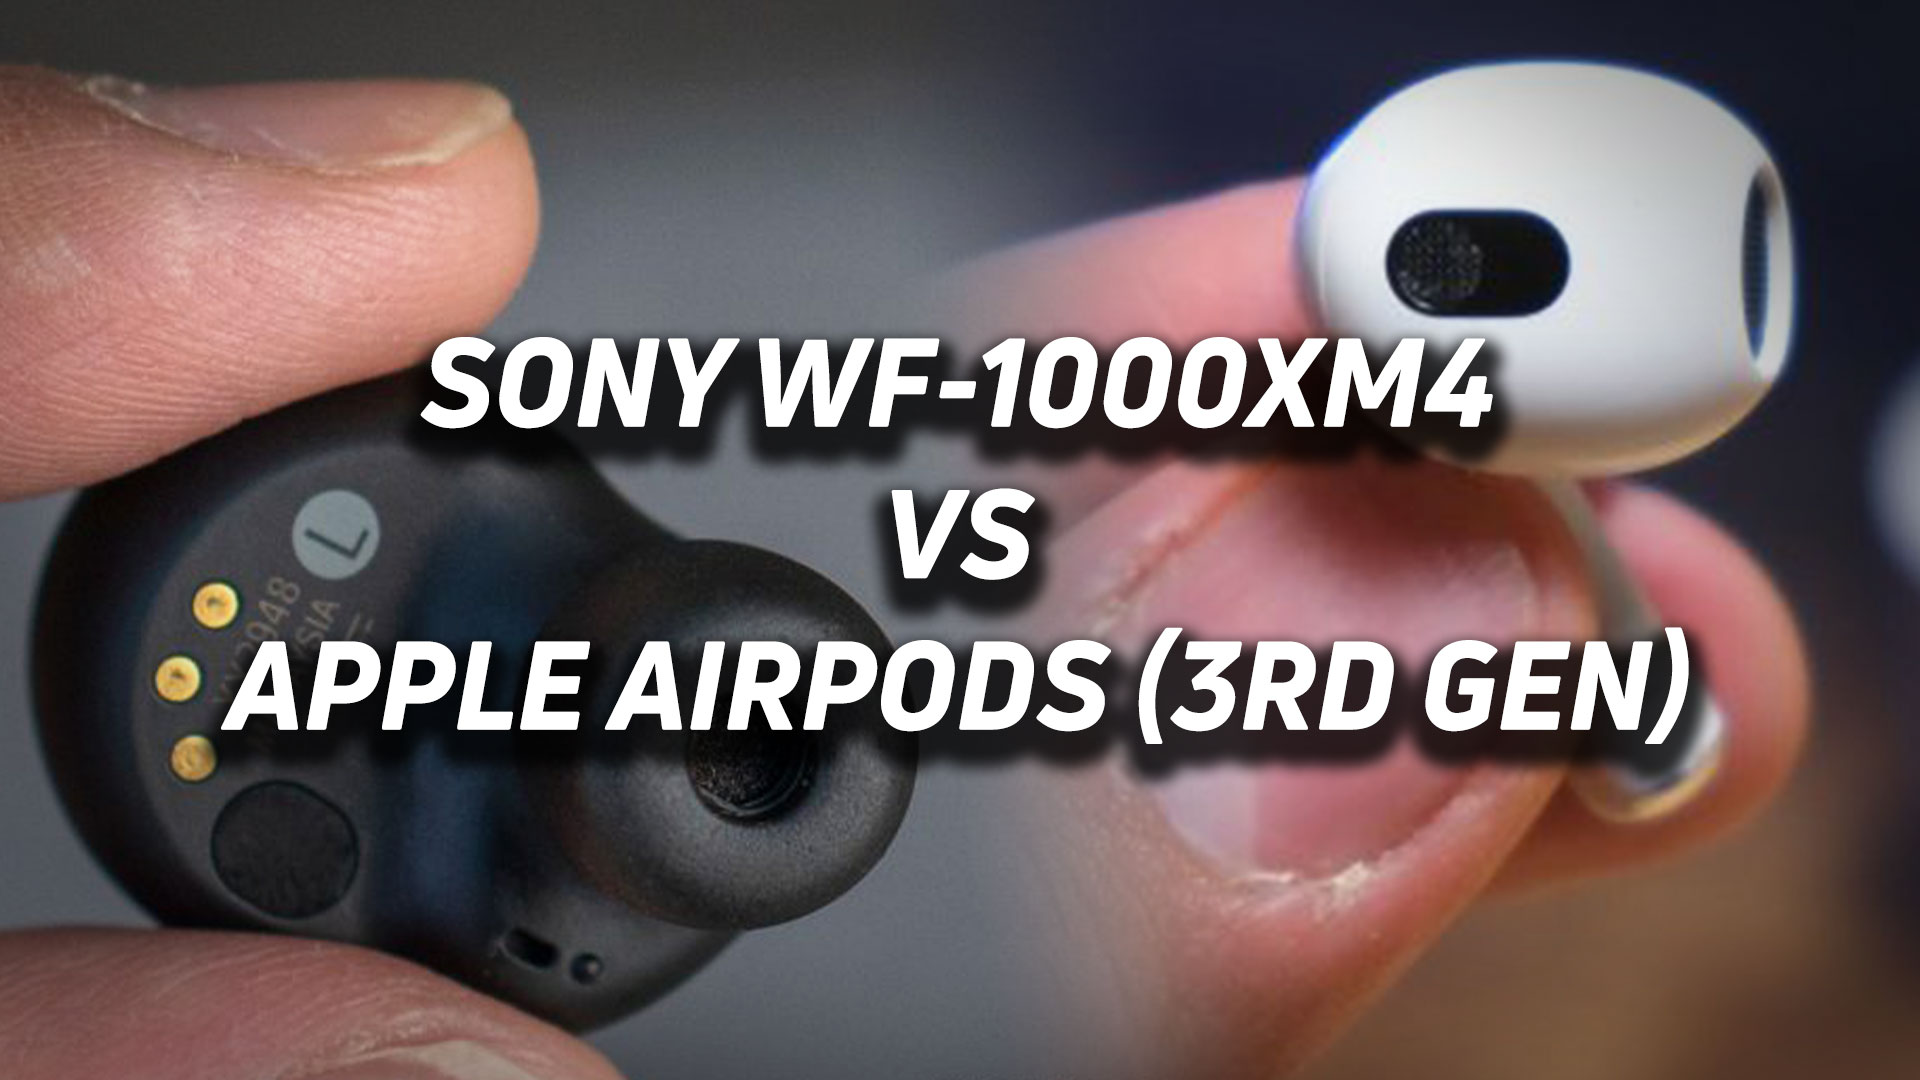 A blended image of the Sony WF-1000XM4 and Apple AirPods (3rd generation).